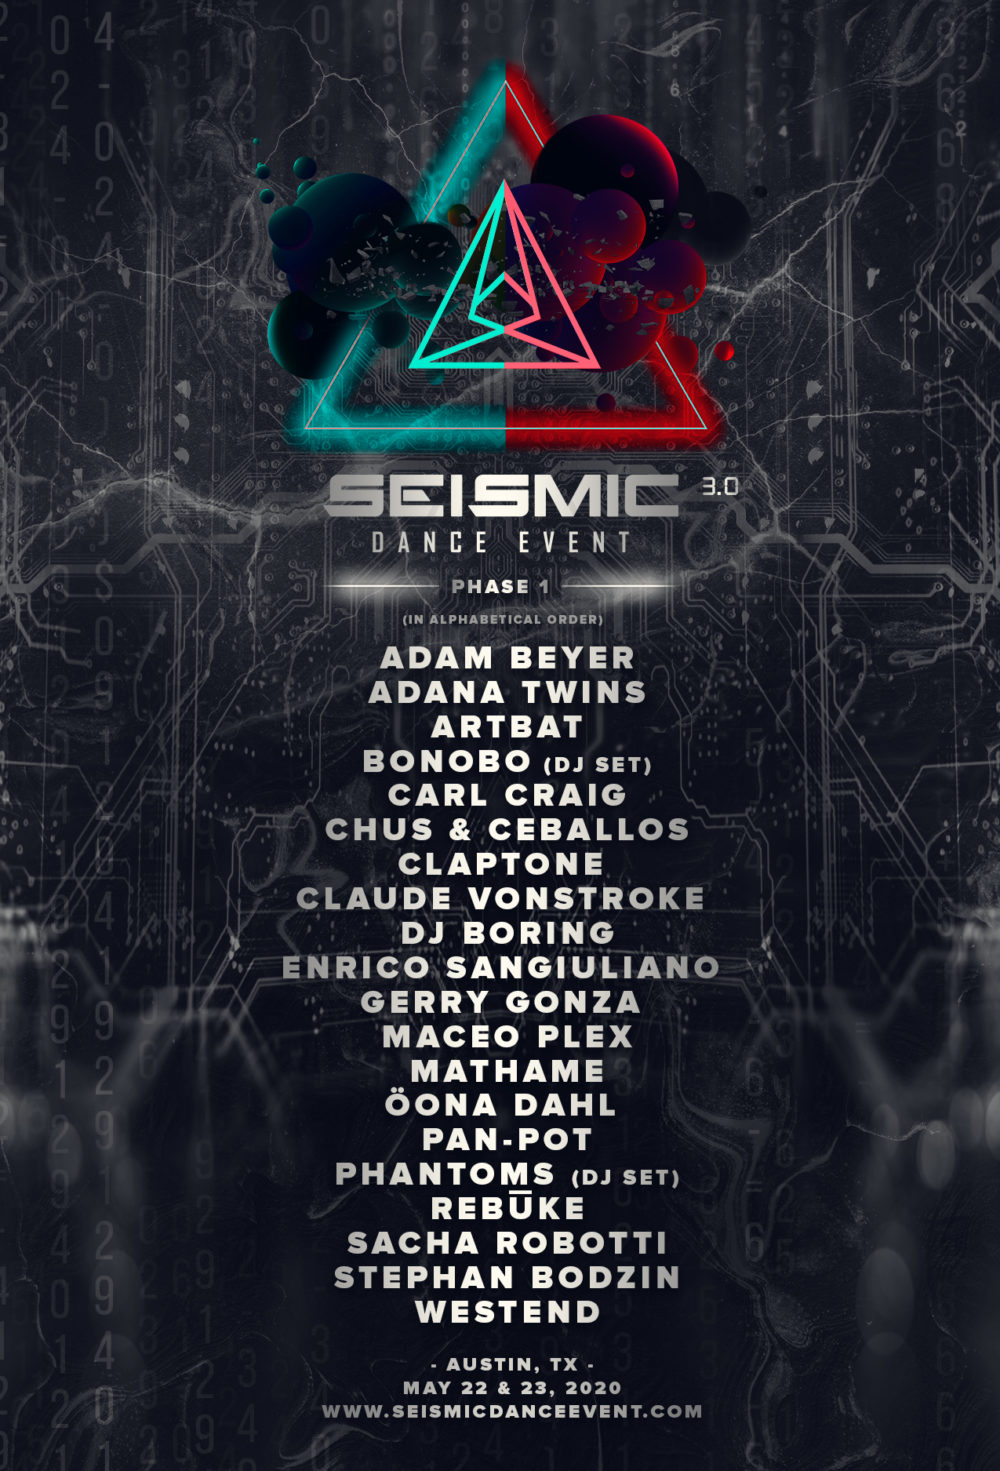 Seismic Dance Event Causes a Quake with Its Phase 1 Lineup for 2020